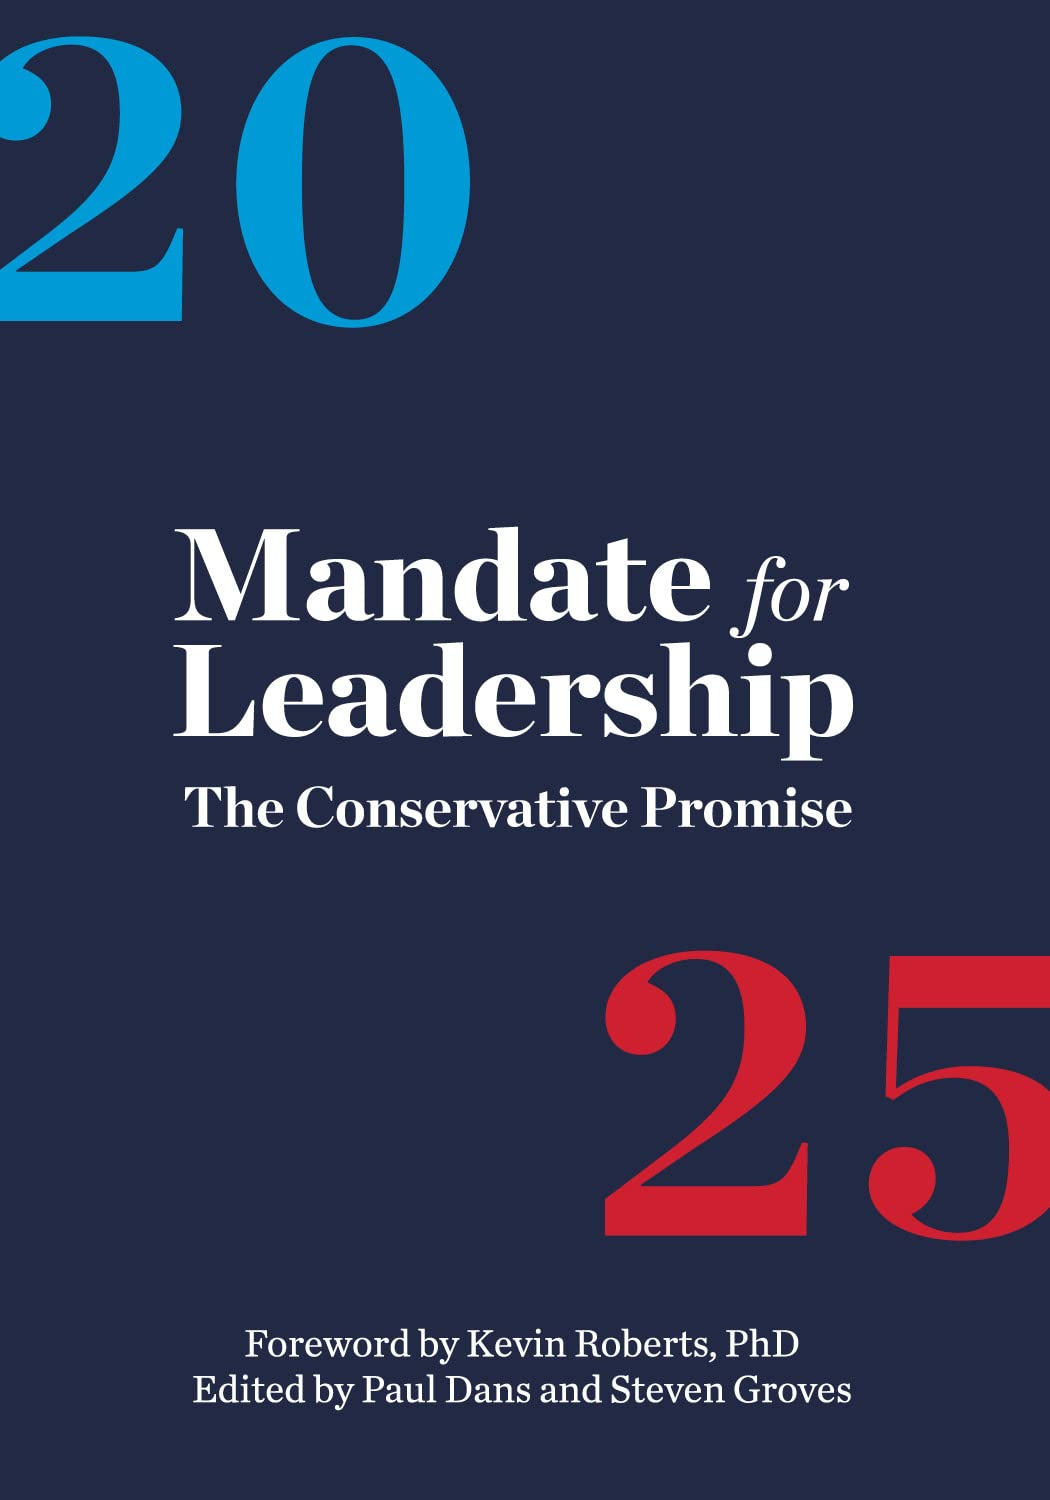 Mandate for Leadership: The Conservative Promise by Project 2025 | Goodreads